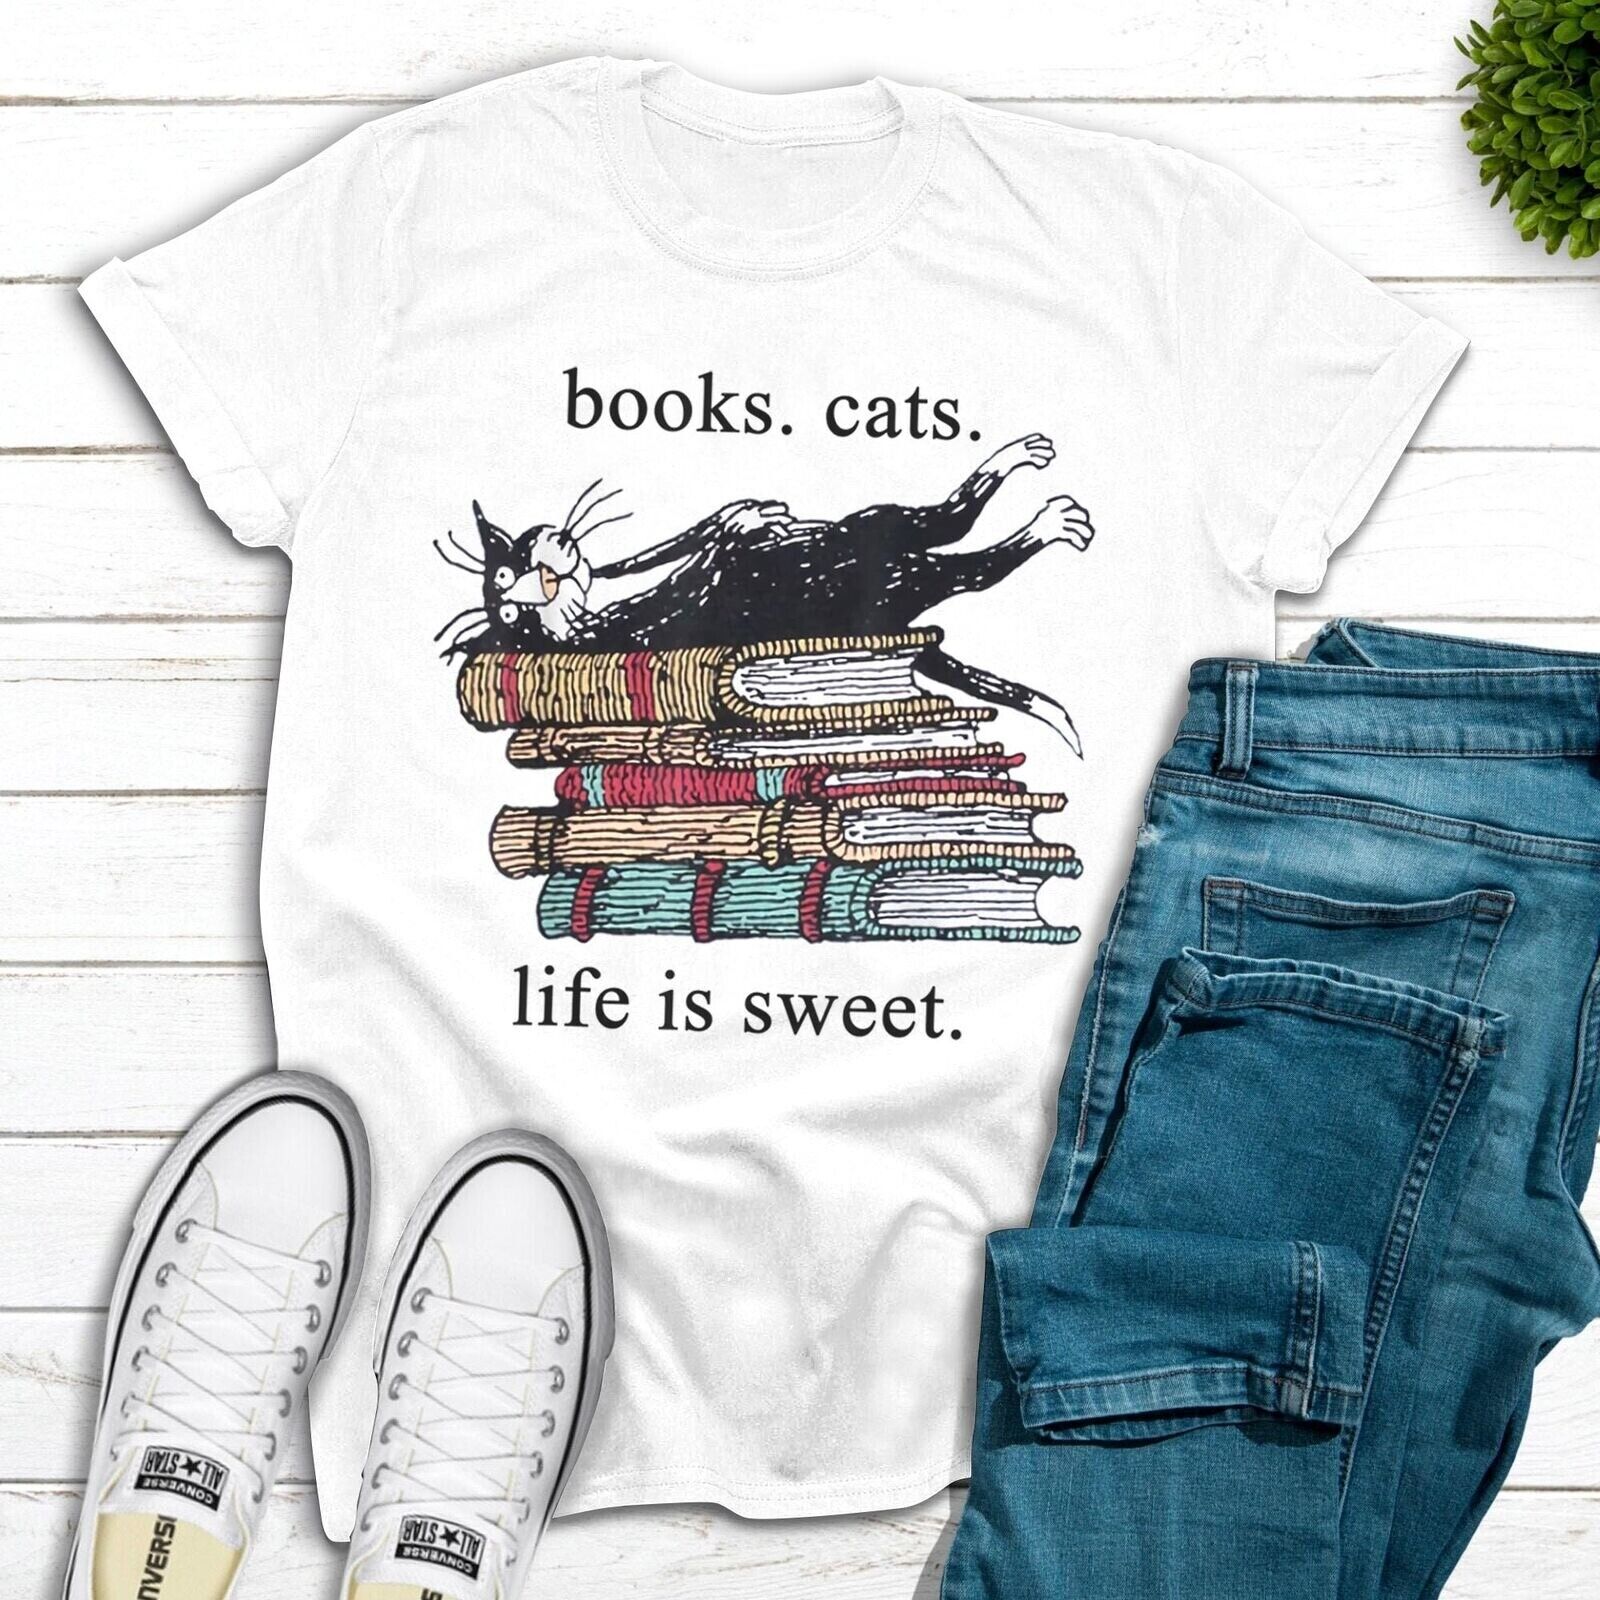 Books Cats Life Is Sweet Cat Book Lovers Reading Book TShirt 5XL | eBay